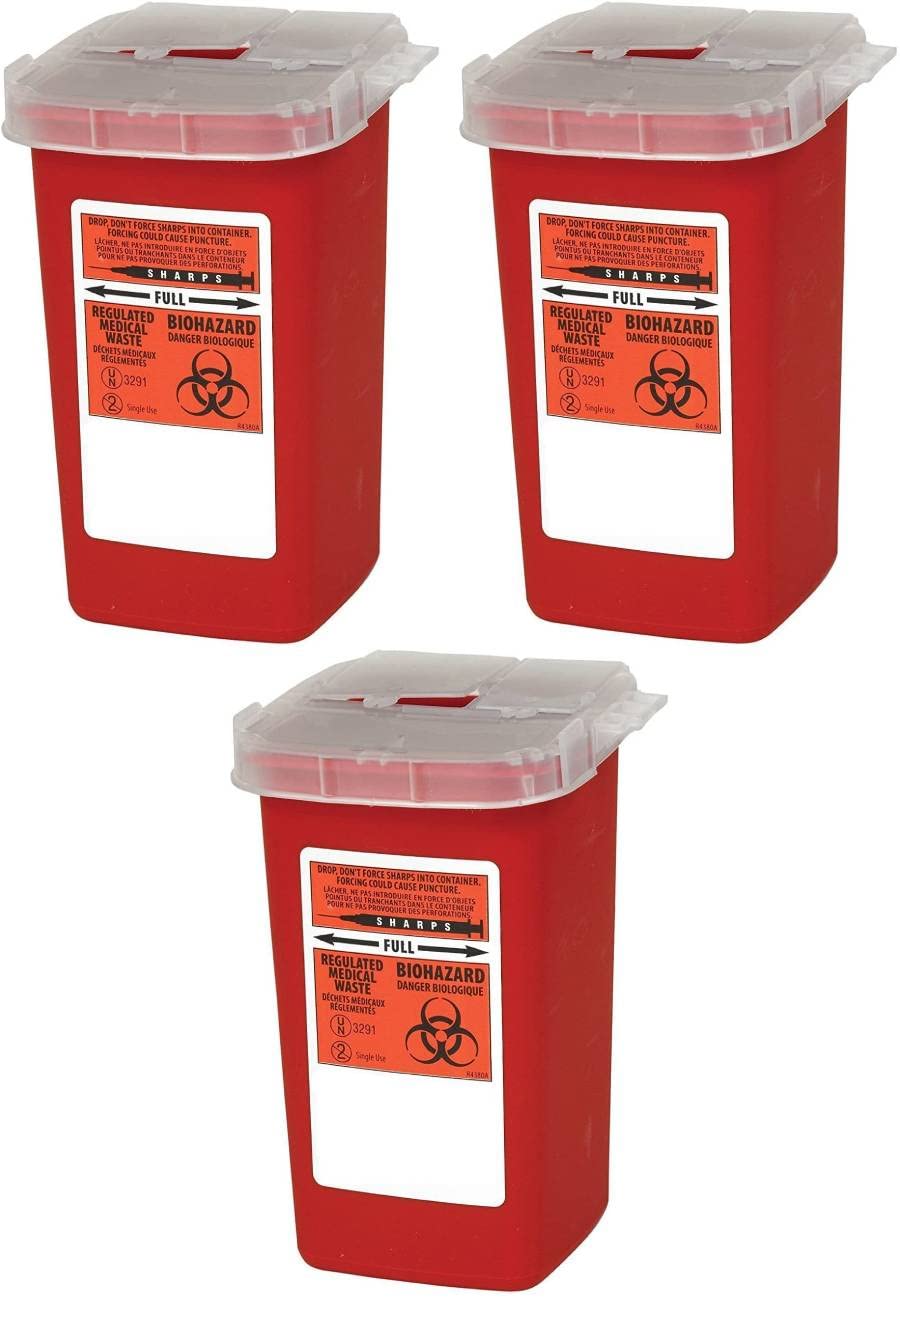 [Australia] - Global Sharps Container Biohazard Needle Disposal Container - 1 Quart (Pack of 3) 